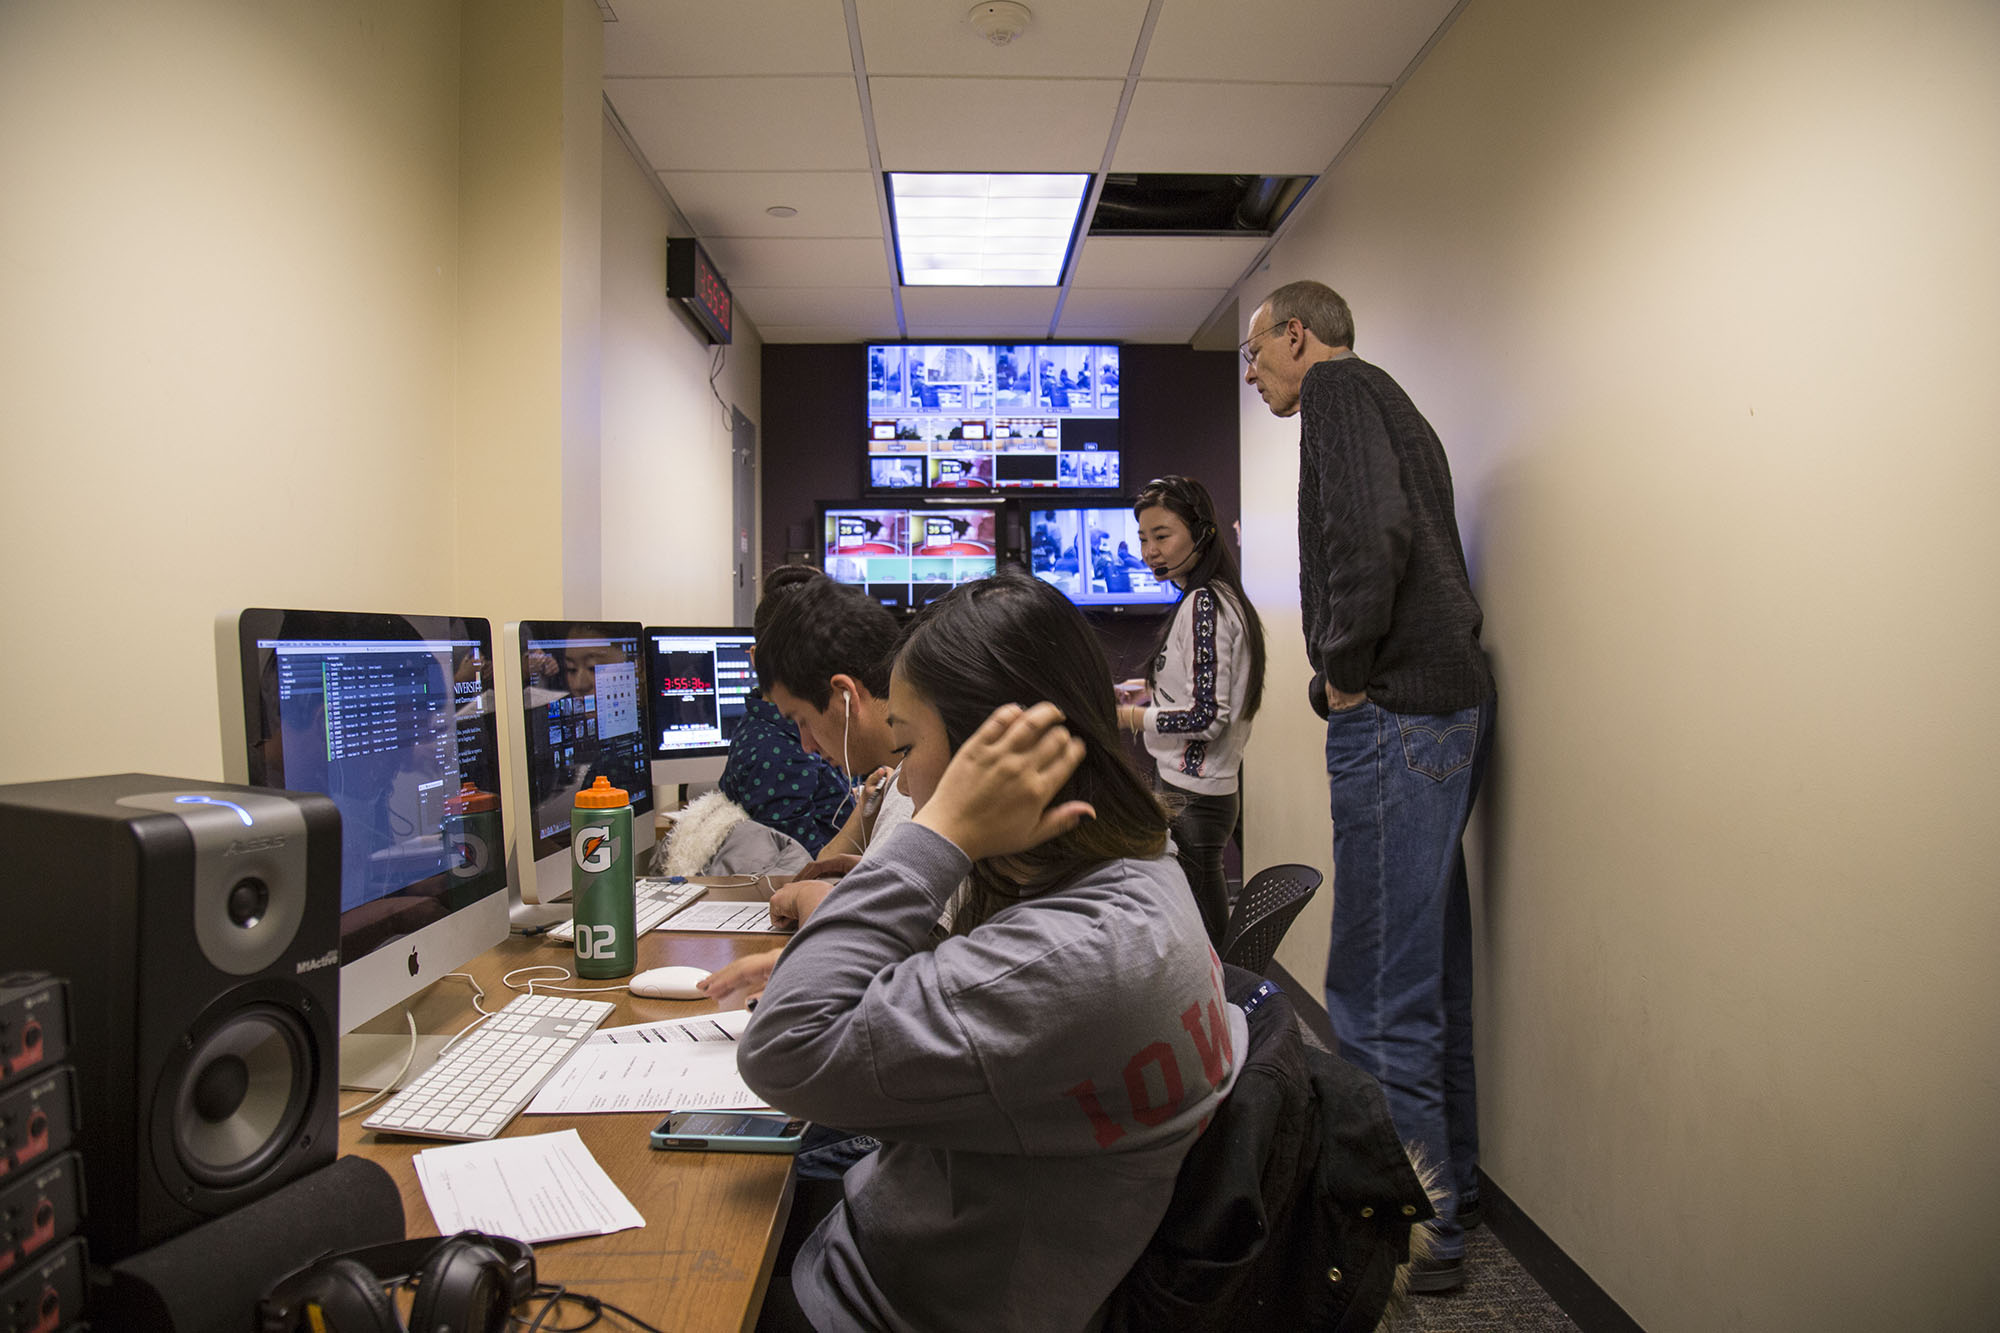 Jeff Ames, lecturer, monitors students in the studio’s control room during the filming of an episode of ISUtv. Photo by Matt Wettengel